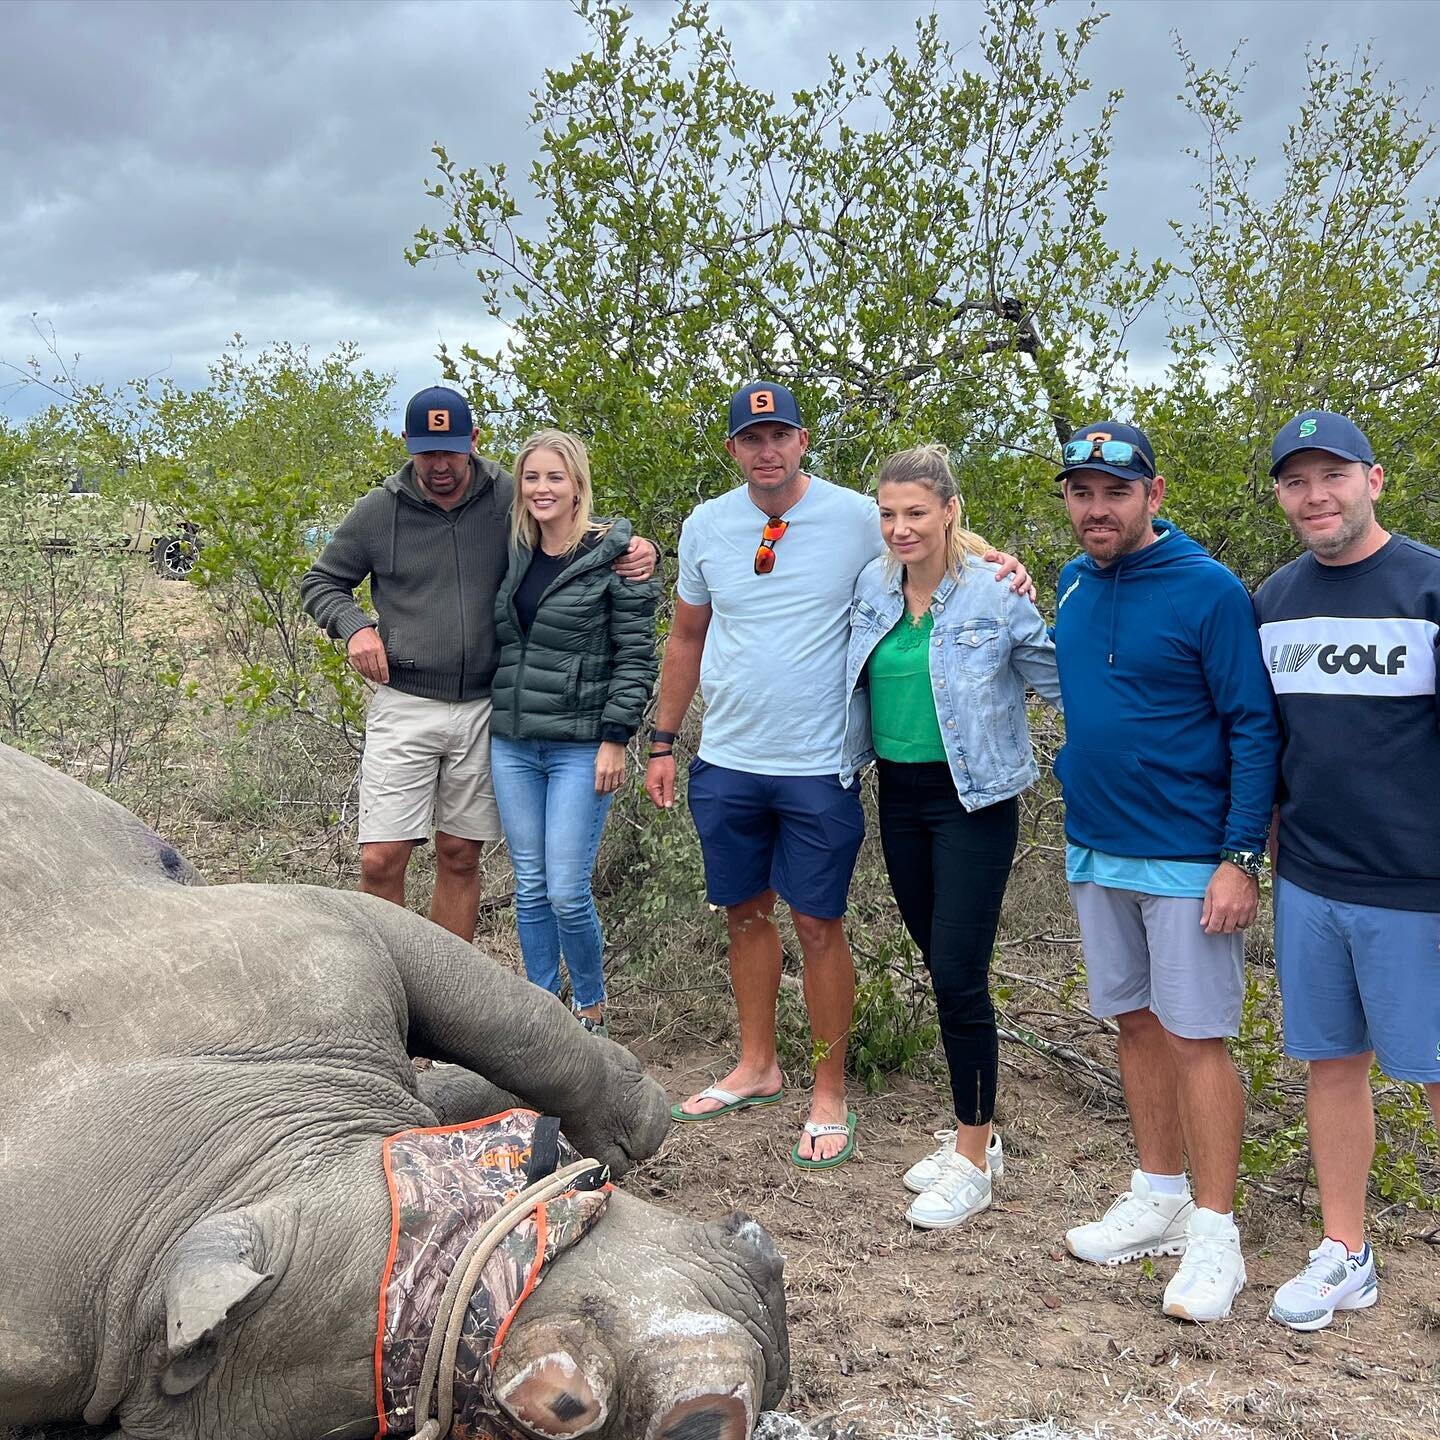 Team @stingergc_ doing their bit for Rhino Conservation this week.

So sad and humbling to witness a de-horning of a rhino. Sad this is the only way that seems to prevent these amazing animals from being poached.

@livgolf_league @birdies4rhinos 
🦏